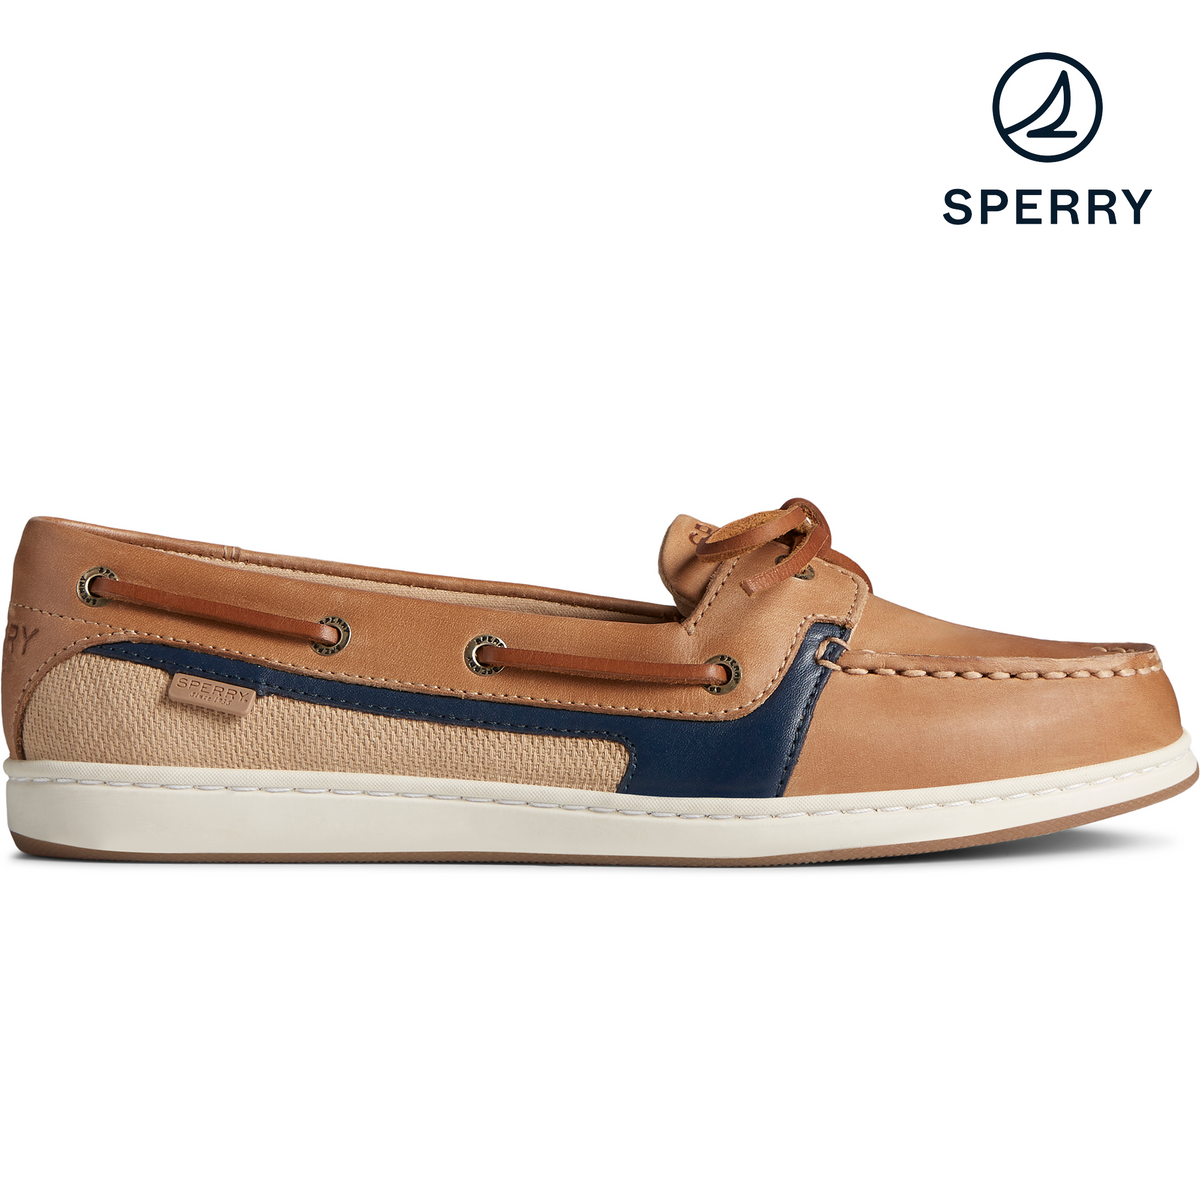 Women's Starfish Boat Shoes Tan/Navy (STS86212)